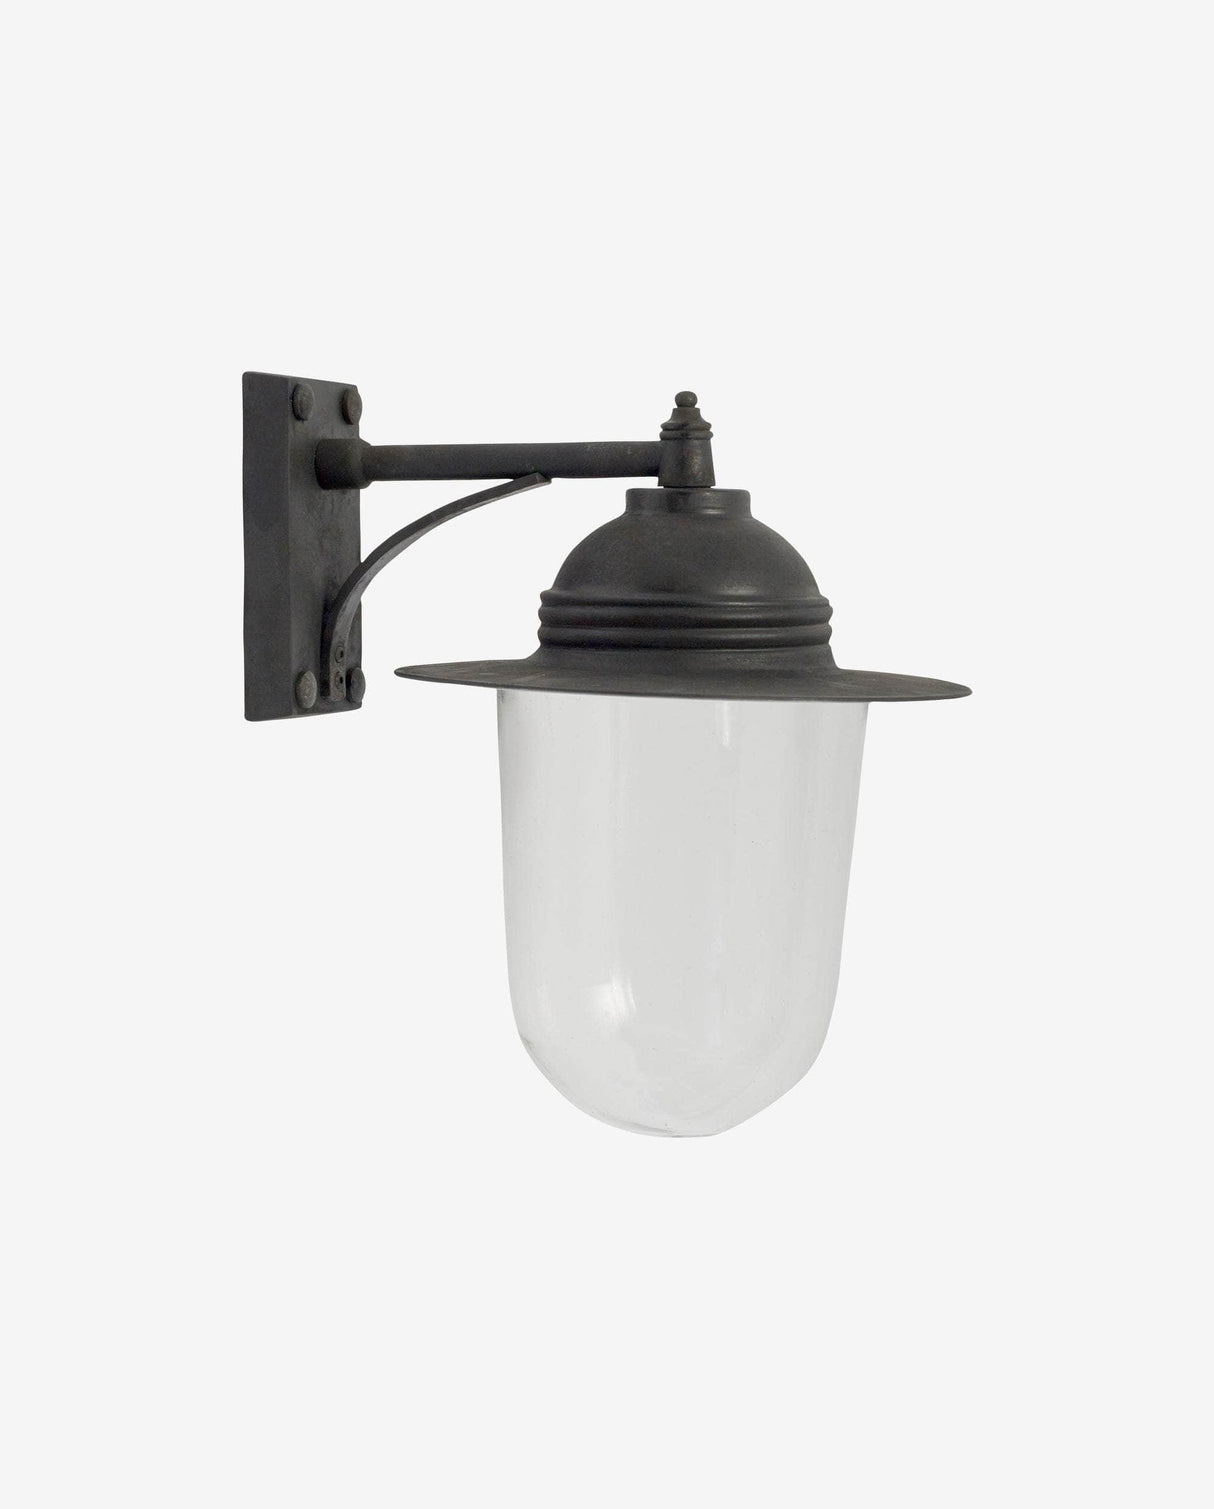 Nordal Outdoor lamp for wall, black finish